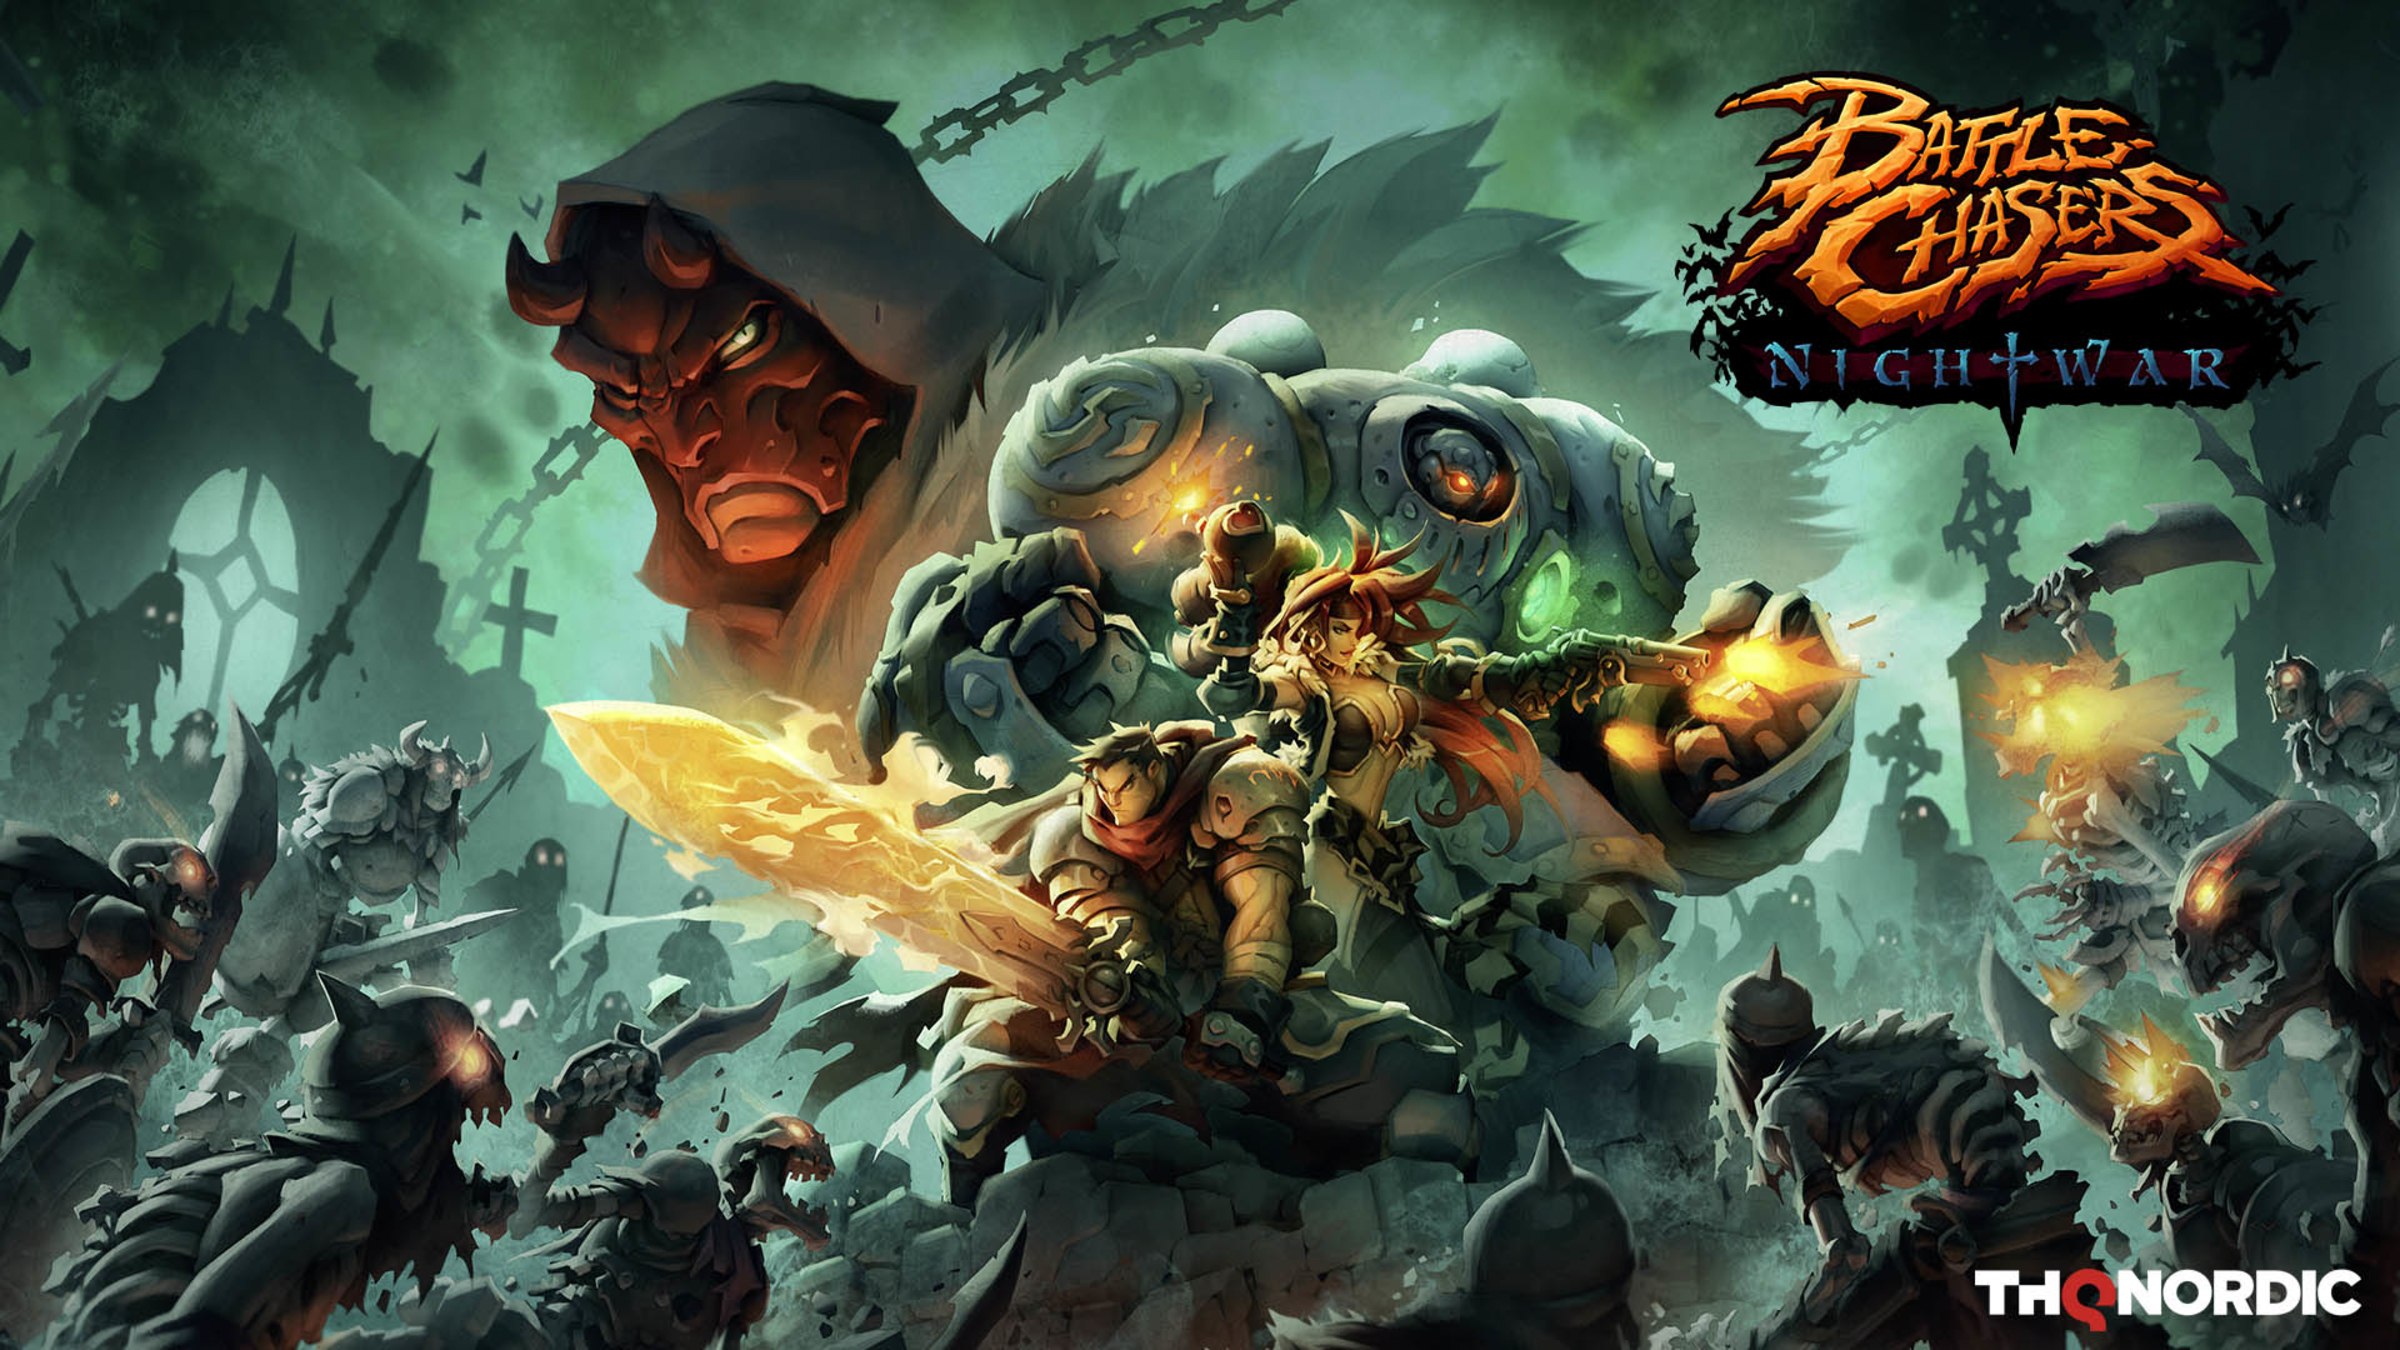 Battle Chasers: Nightwar For Nintendo Switch - Nintendo Official Site